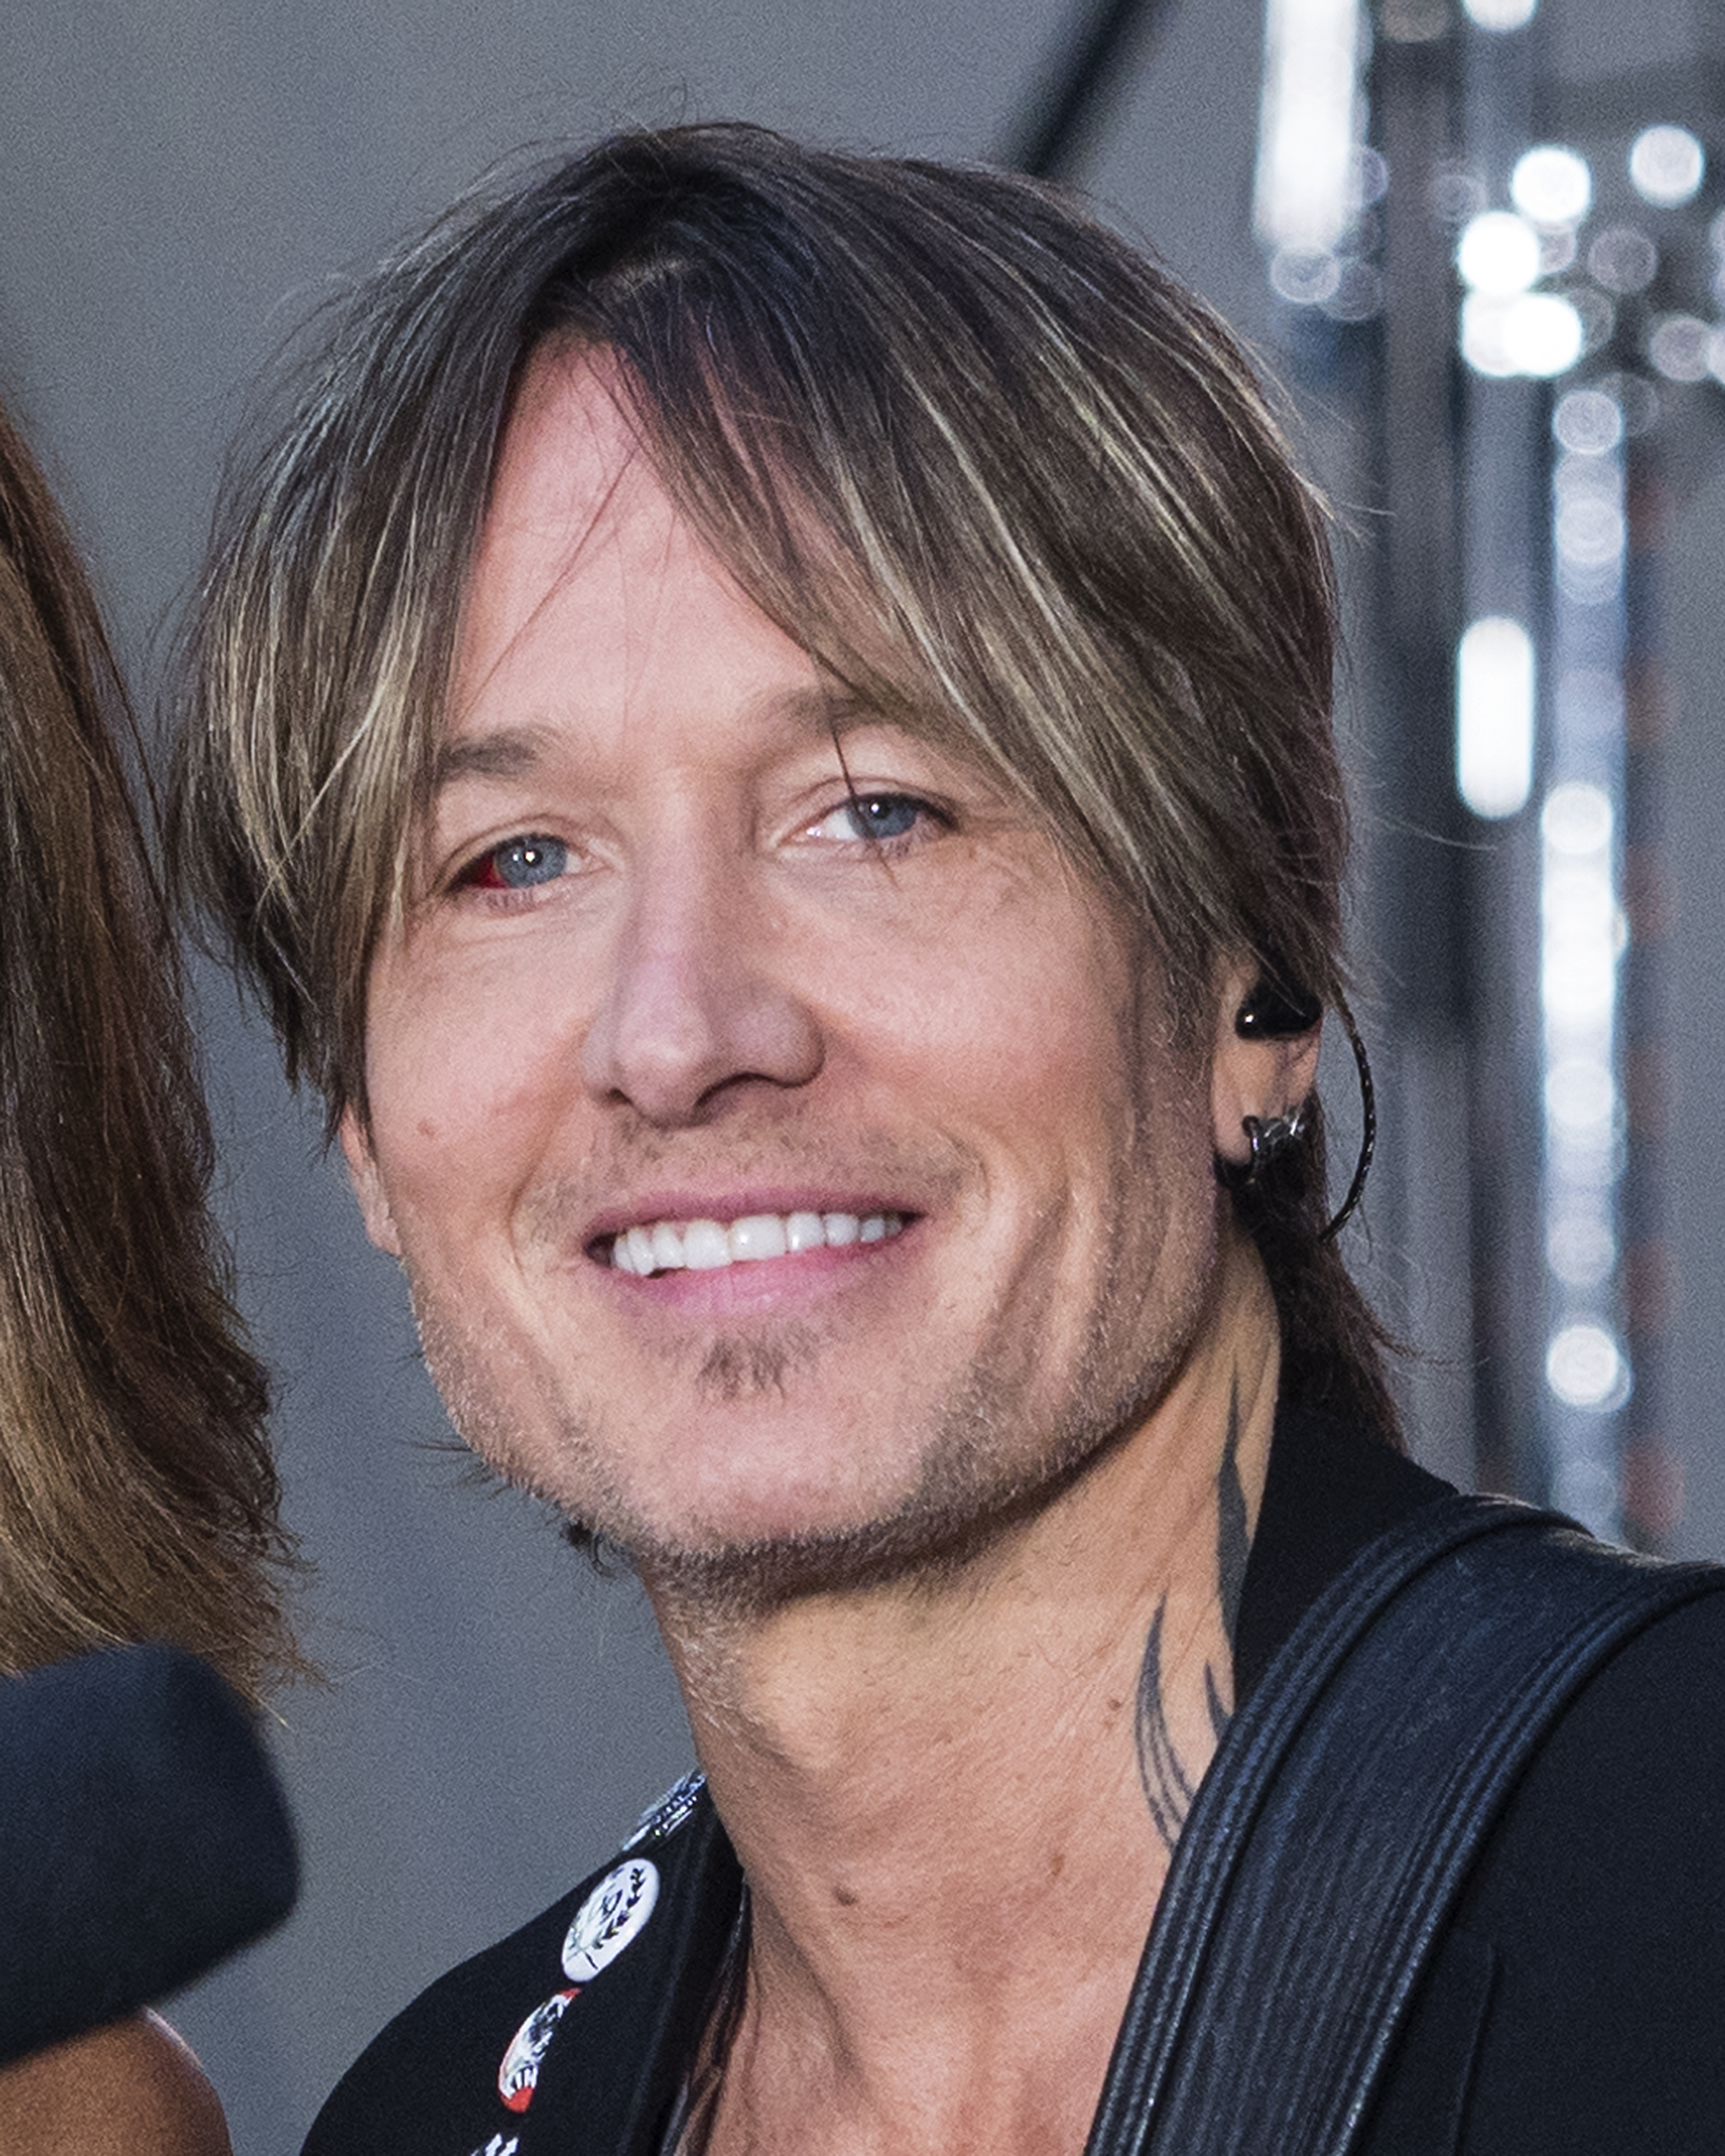 Keith Urban performing on "Today" on September 3, 2021, in New York City. | Source: Getty Images